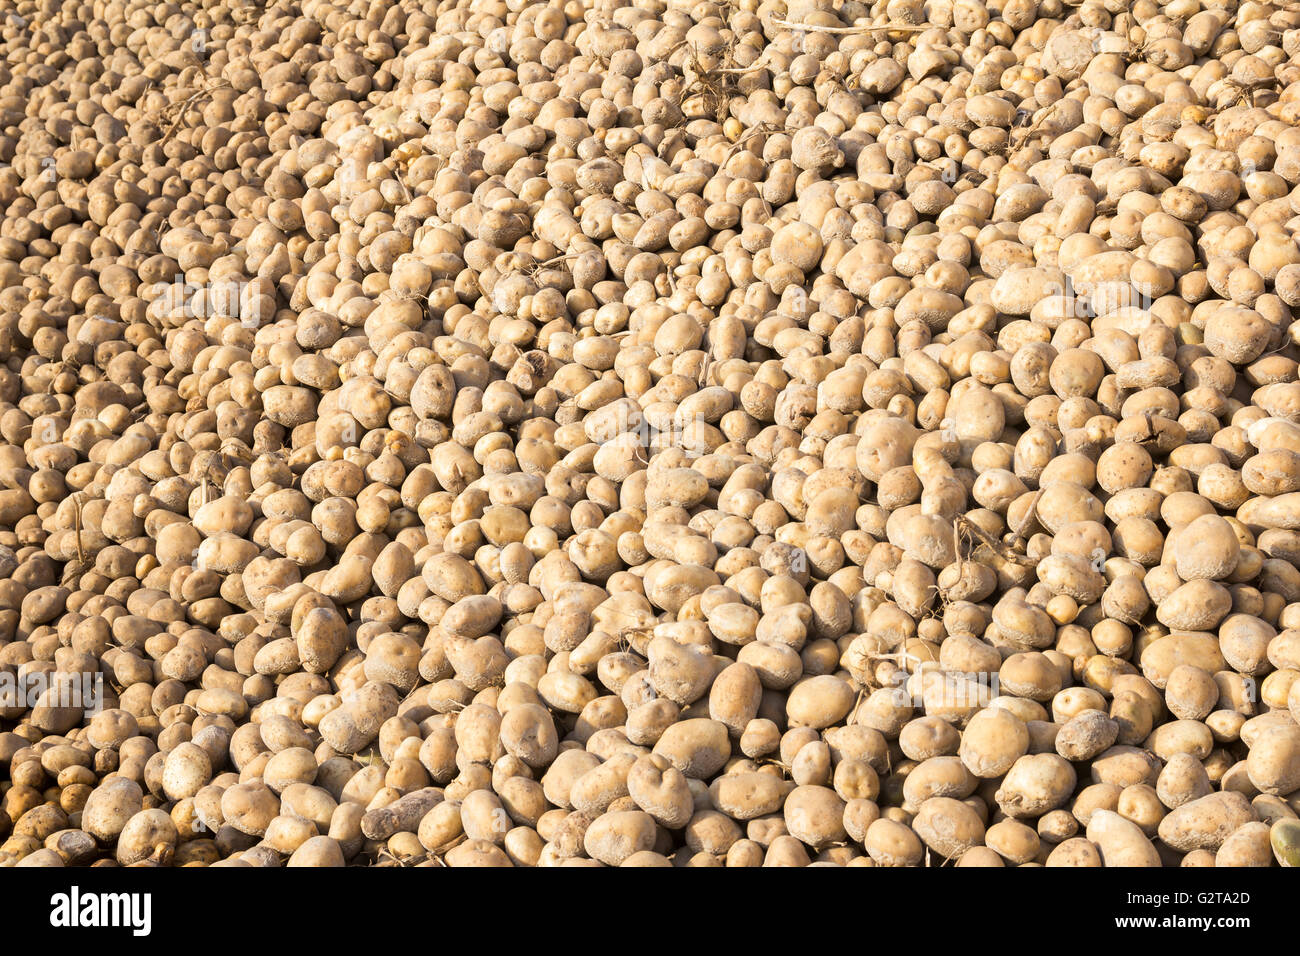 10.10.2015, Nauen, Brandenburg, Germany - Berg harvested potatoes. 0GB151010D108CAROEX.JPG - NOT for SALE in G E R M A N Y, A U S T R I A, S W I T Z E R L A N D [MODEL RELEASE: NOT APPLICABLE, PROPERTY RELEASE: NO, (c) caro photo agency / Baertels, http://www.caro-images.com, info@carofoto.pl - Any use of this picture is subject to royalty!] Stock Photo